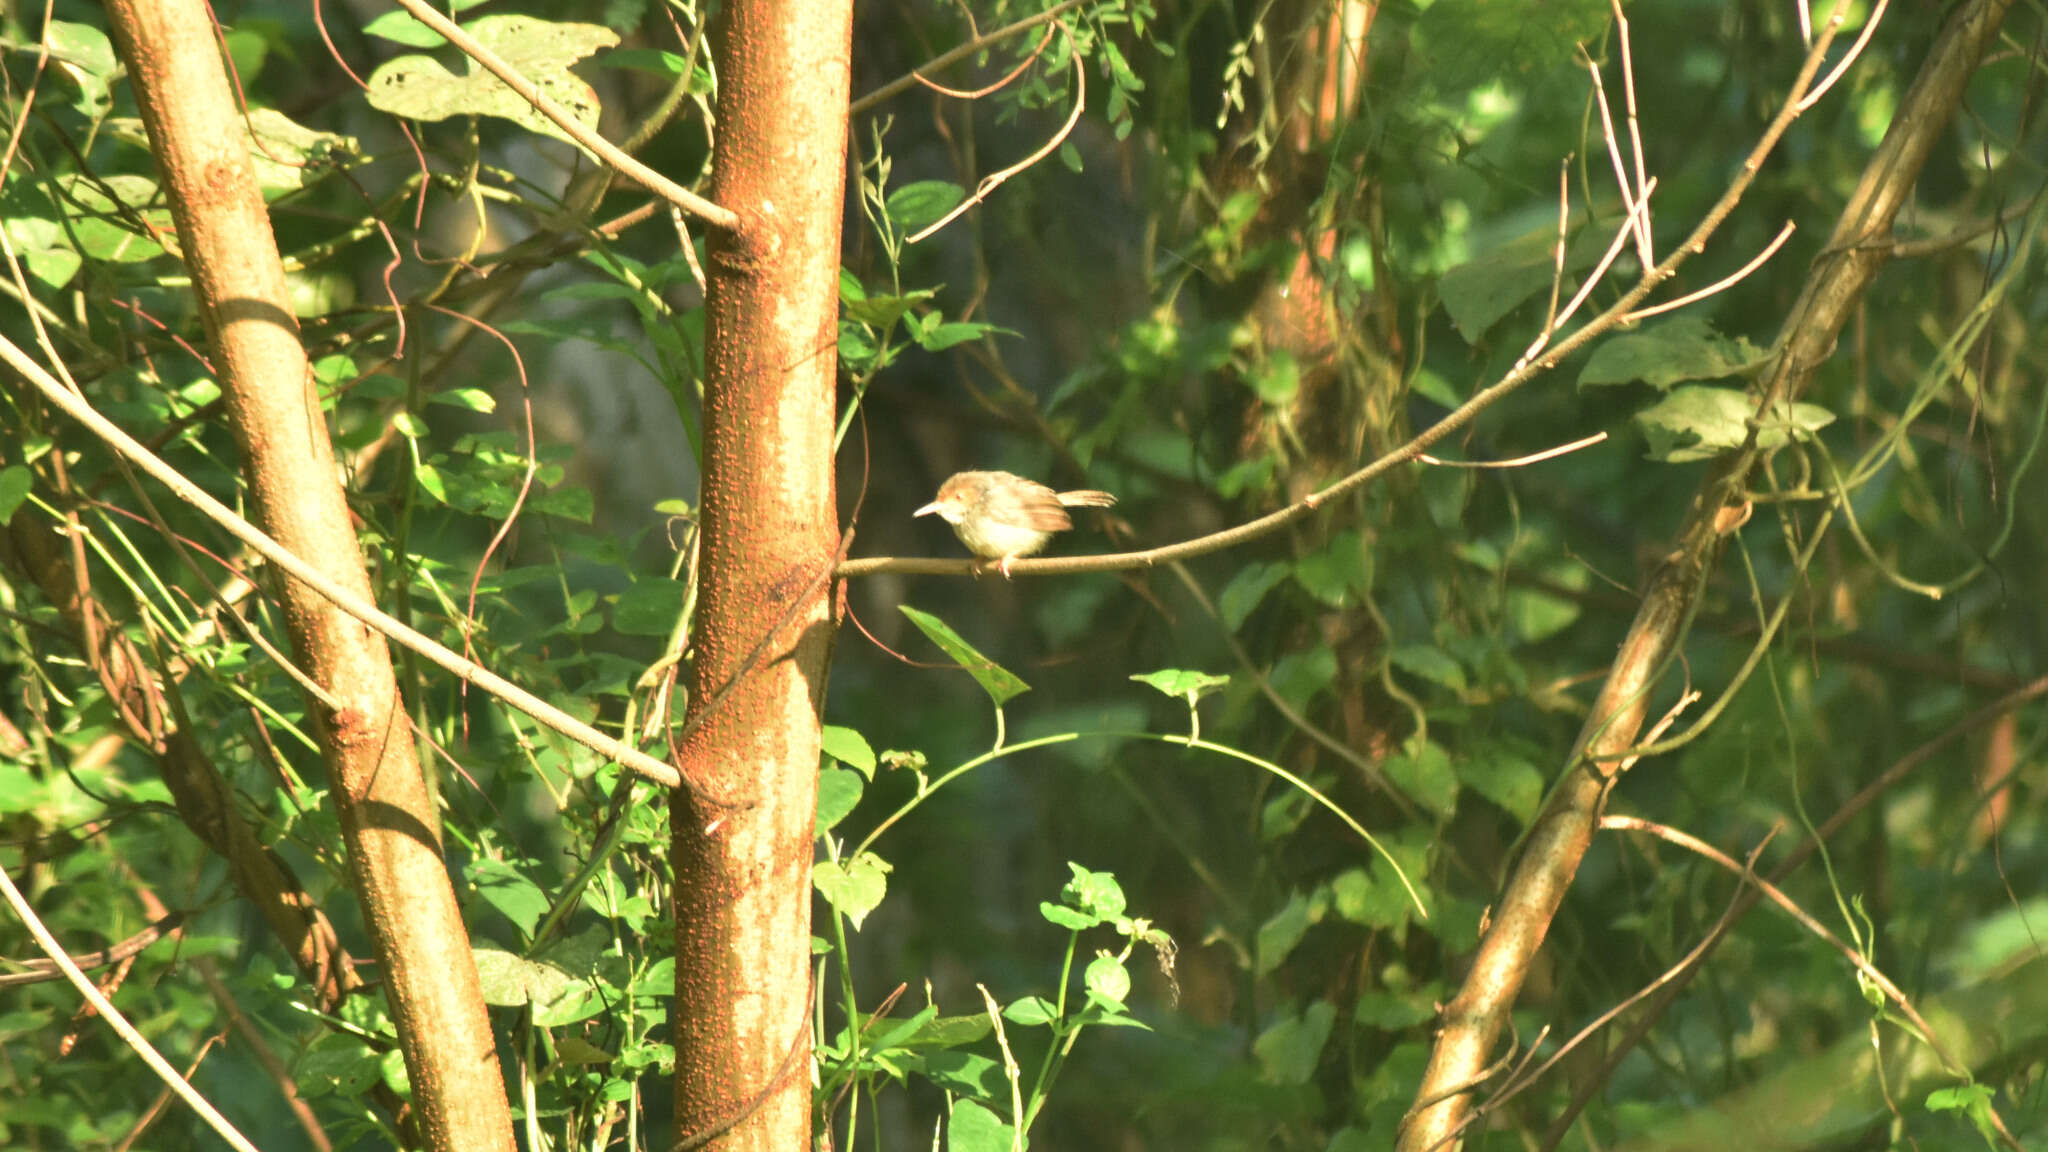 Image of Olive-backed Tailorbird